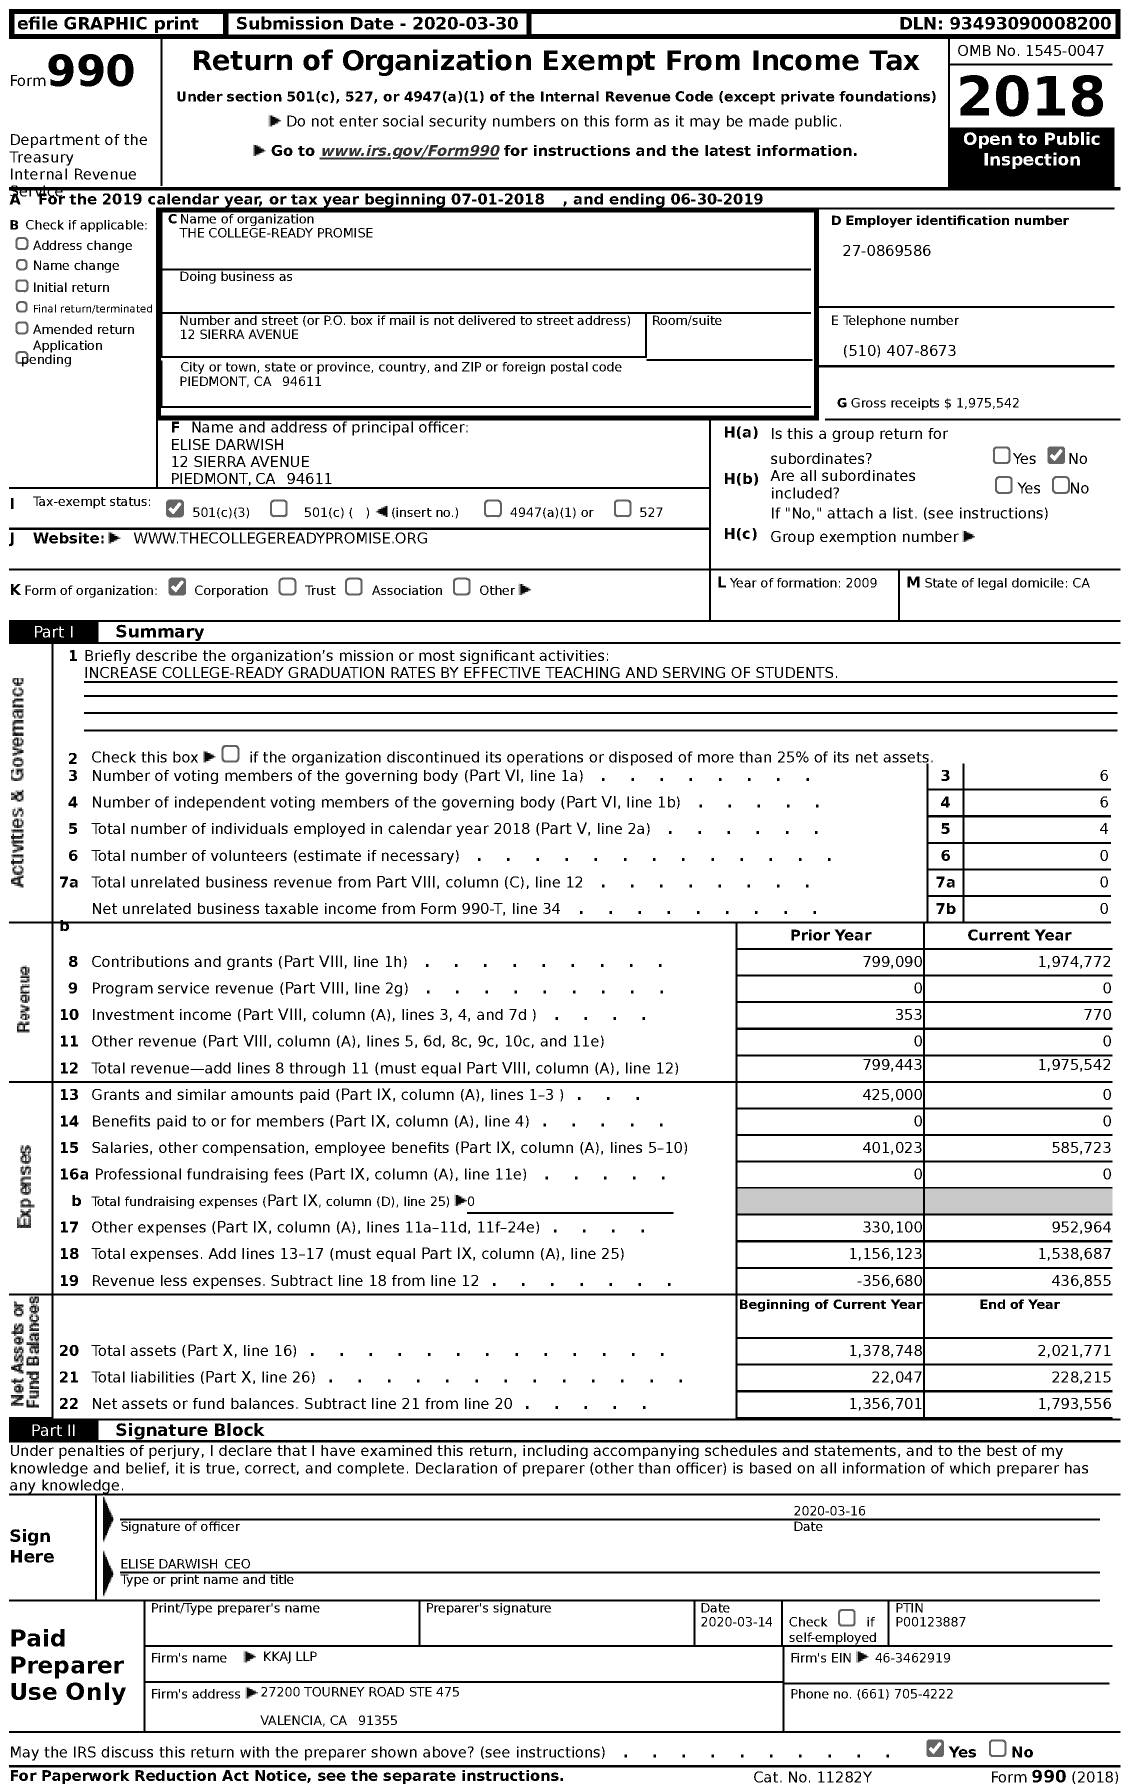 Image of first page of 2018 Form 990 for College Ready Promise the